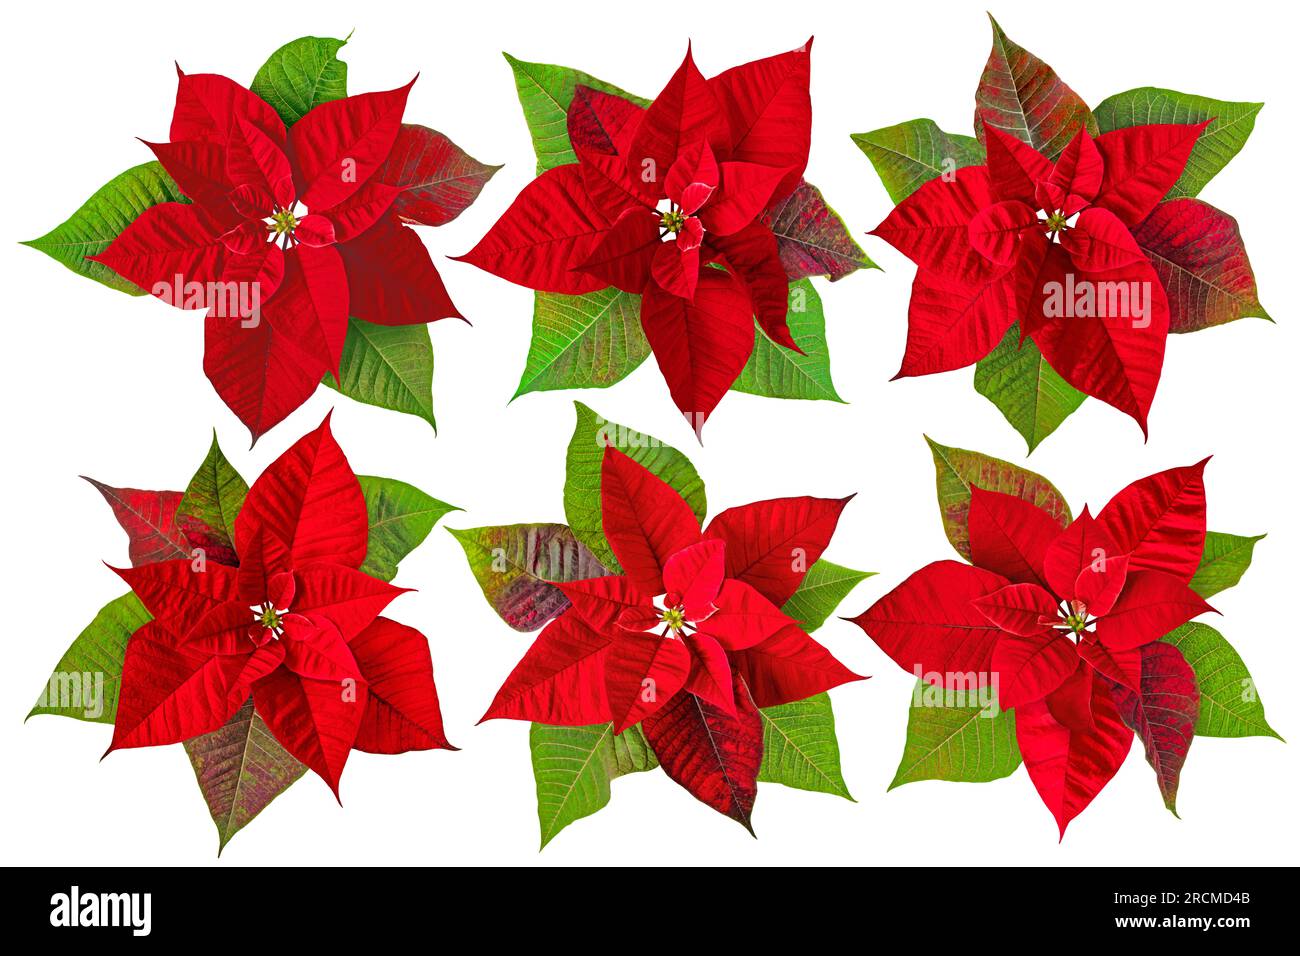 Poinsettia or Christmas Eve flower with leaves set isolated on white. Flor de Pascua. Red euphorbia pulcherrima flowering plant. Stock Photo